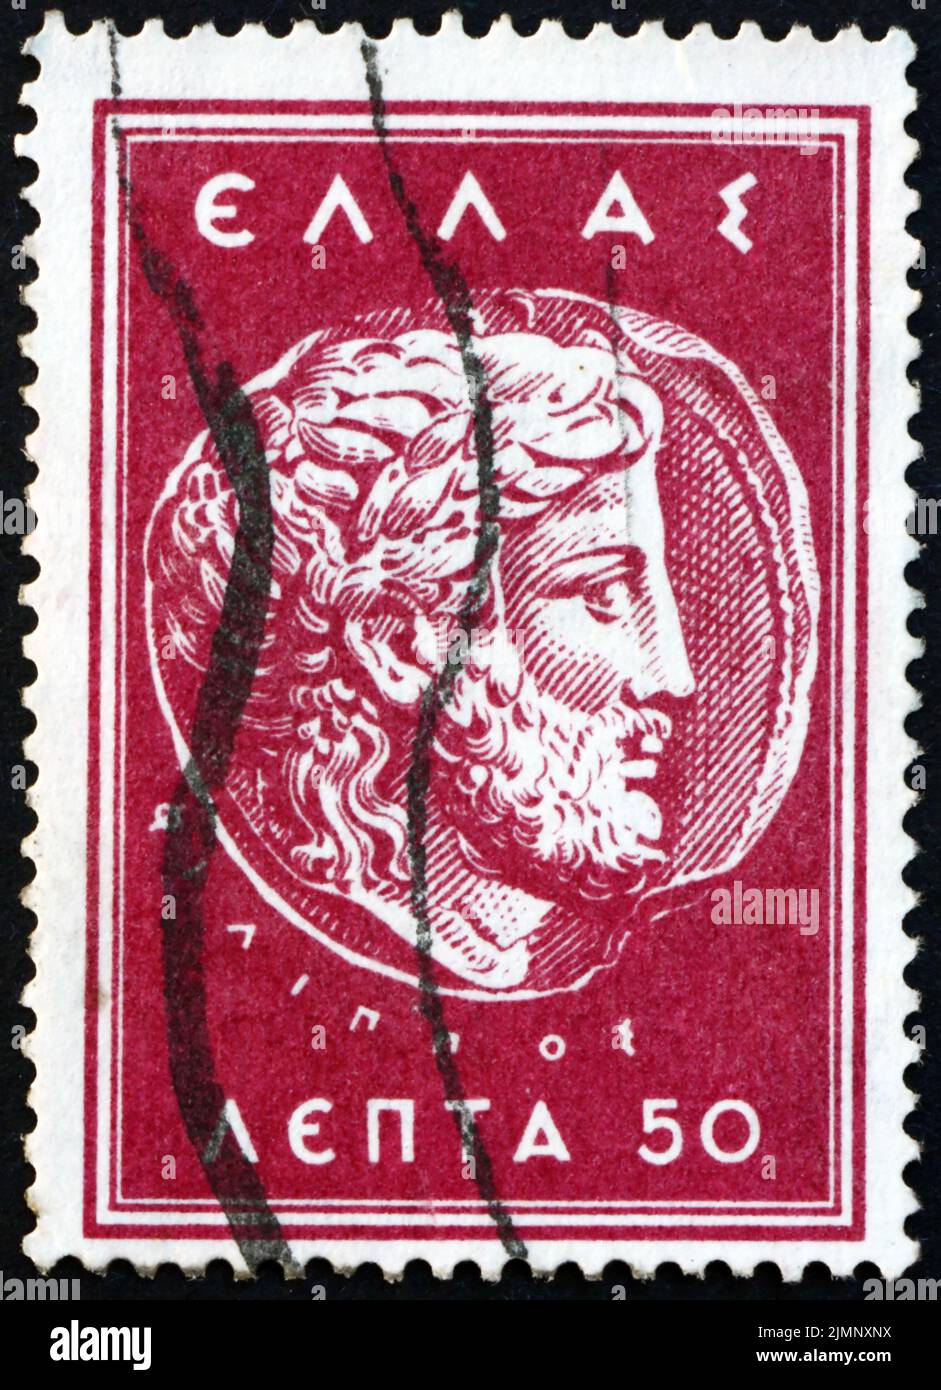 GREECE - CIRCA 1966: a stamp printed in Greece shows Zeus head on Macedonian coin of Philip II, ancient Greek coin, circa 1966 Stock Photo